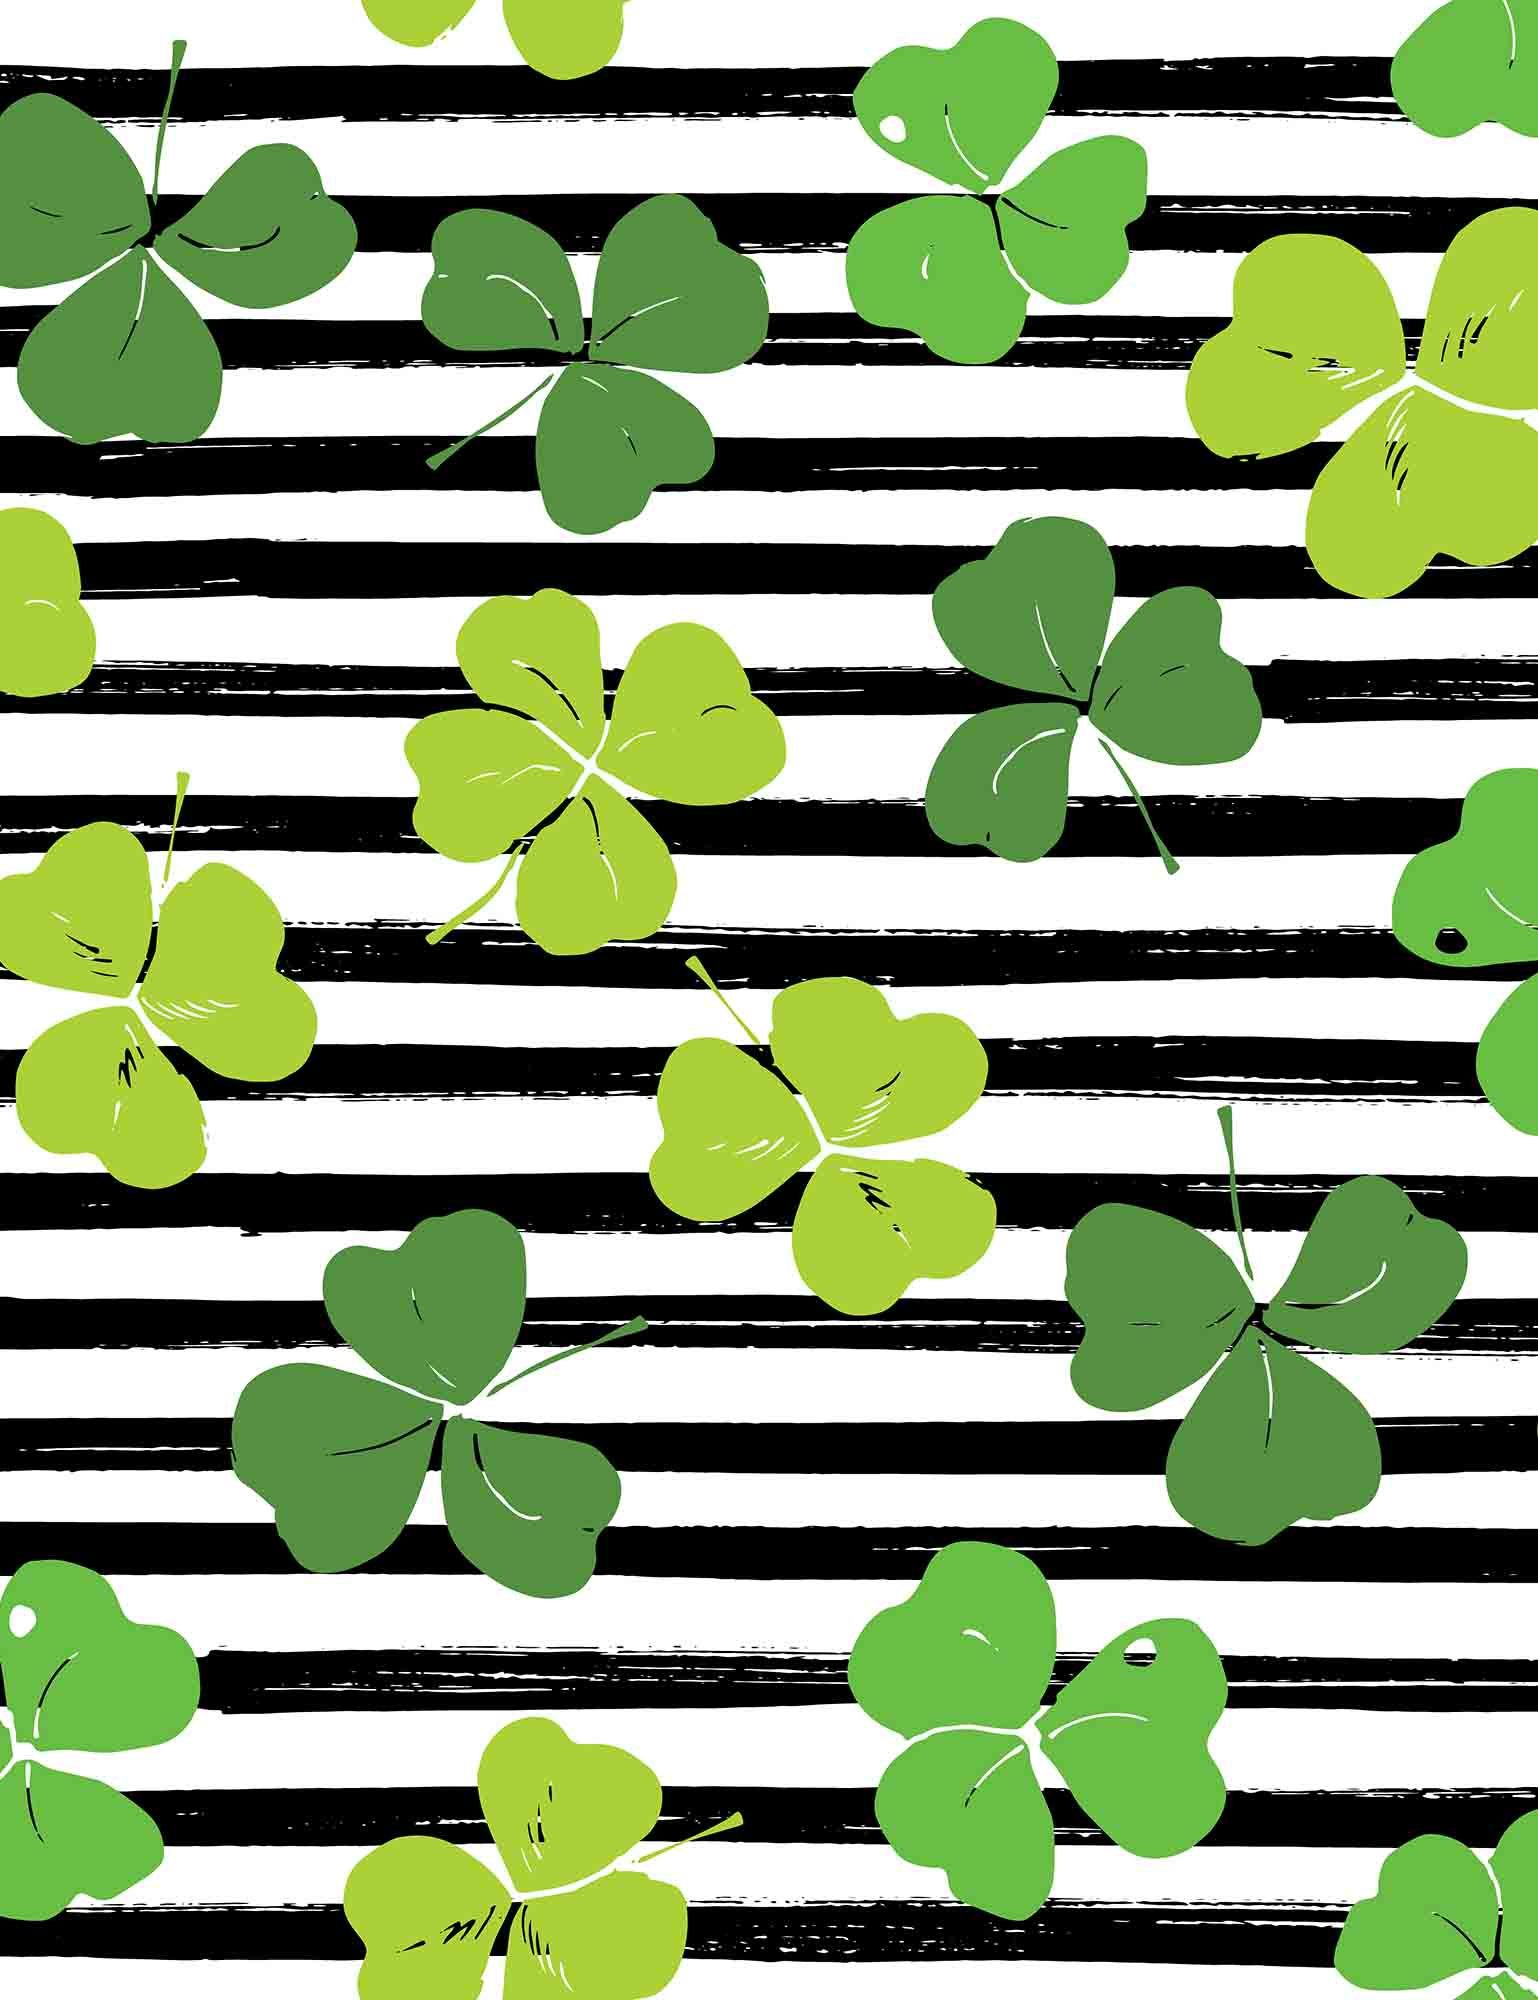 Green Clovers Draw On Black Strips For Saint Patrick's Day Photography Backdrop Shopbackdrop